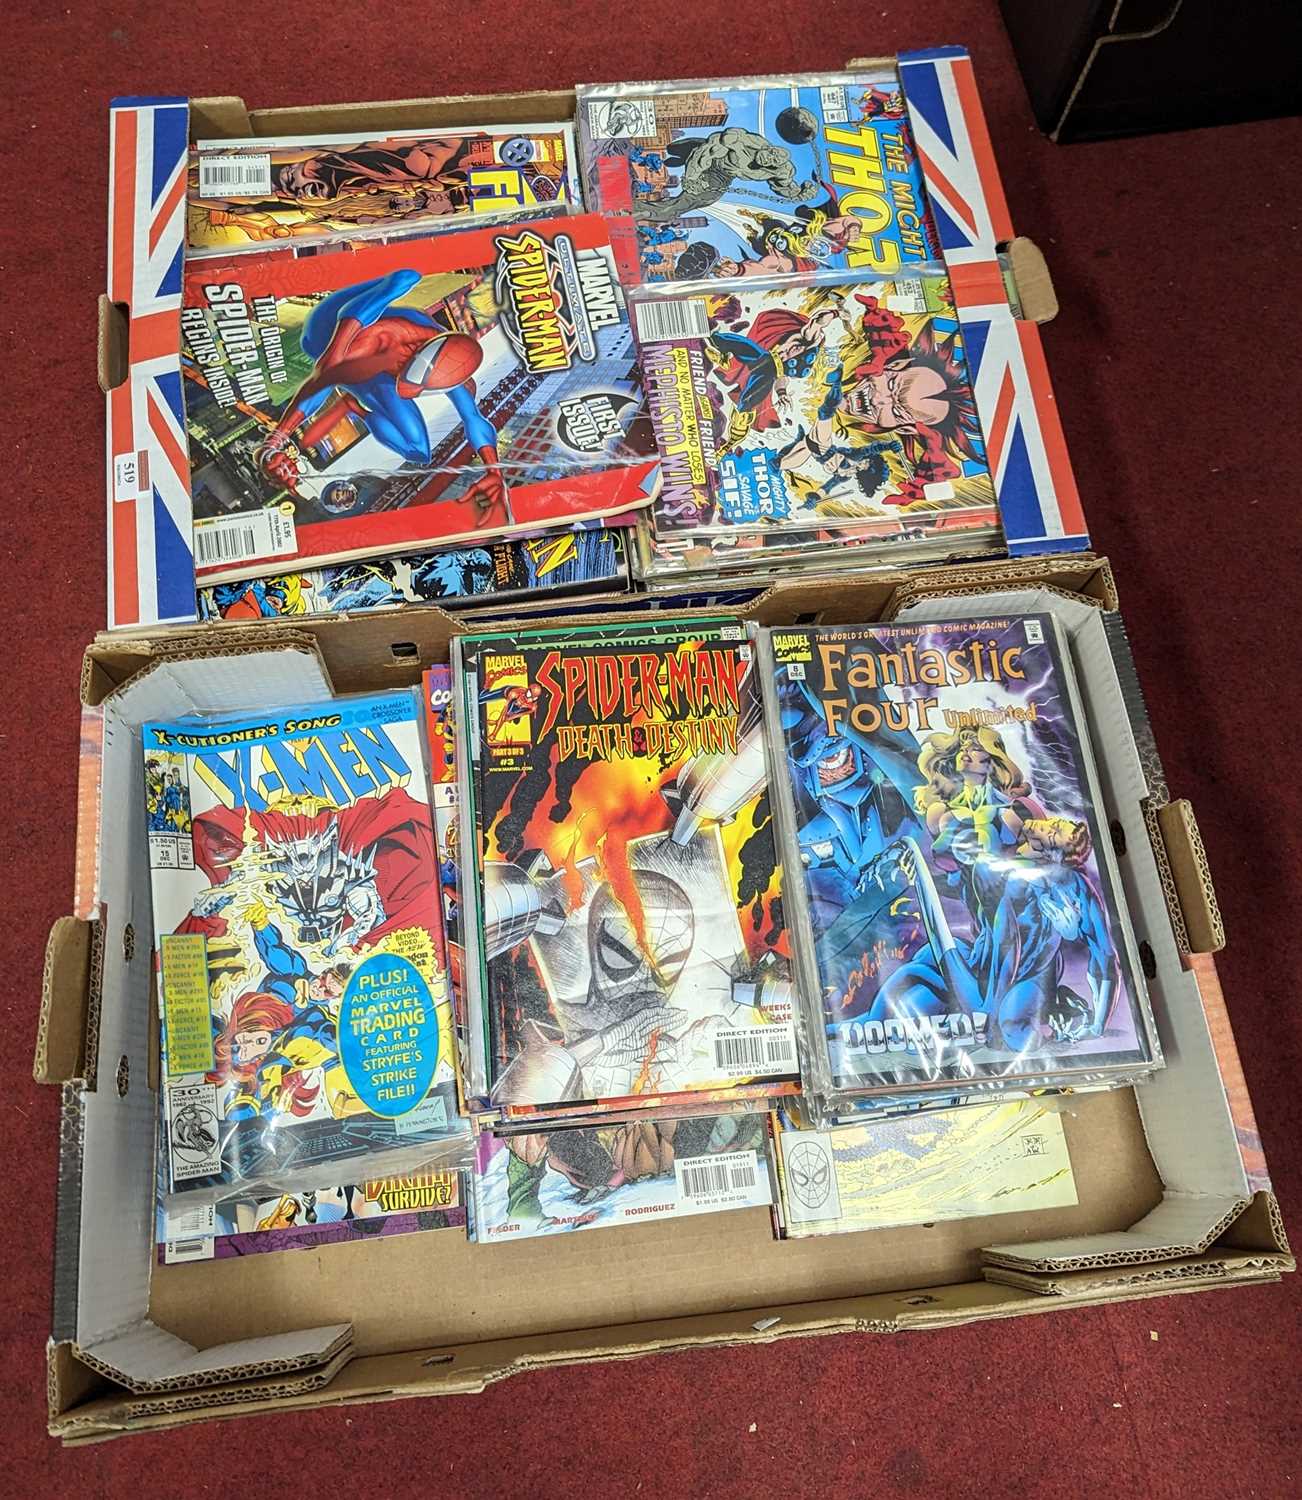 A collection of Marvel comic books, to include Spiderman Death and Destiny, X-Men and X-Force (two